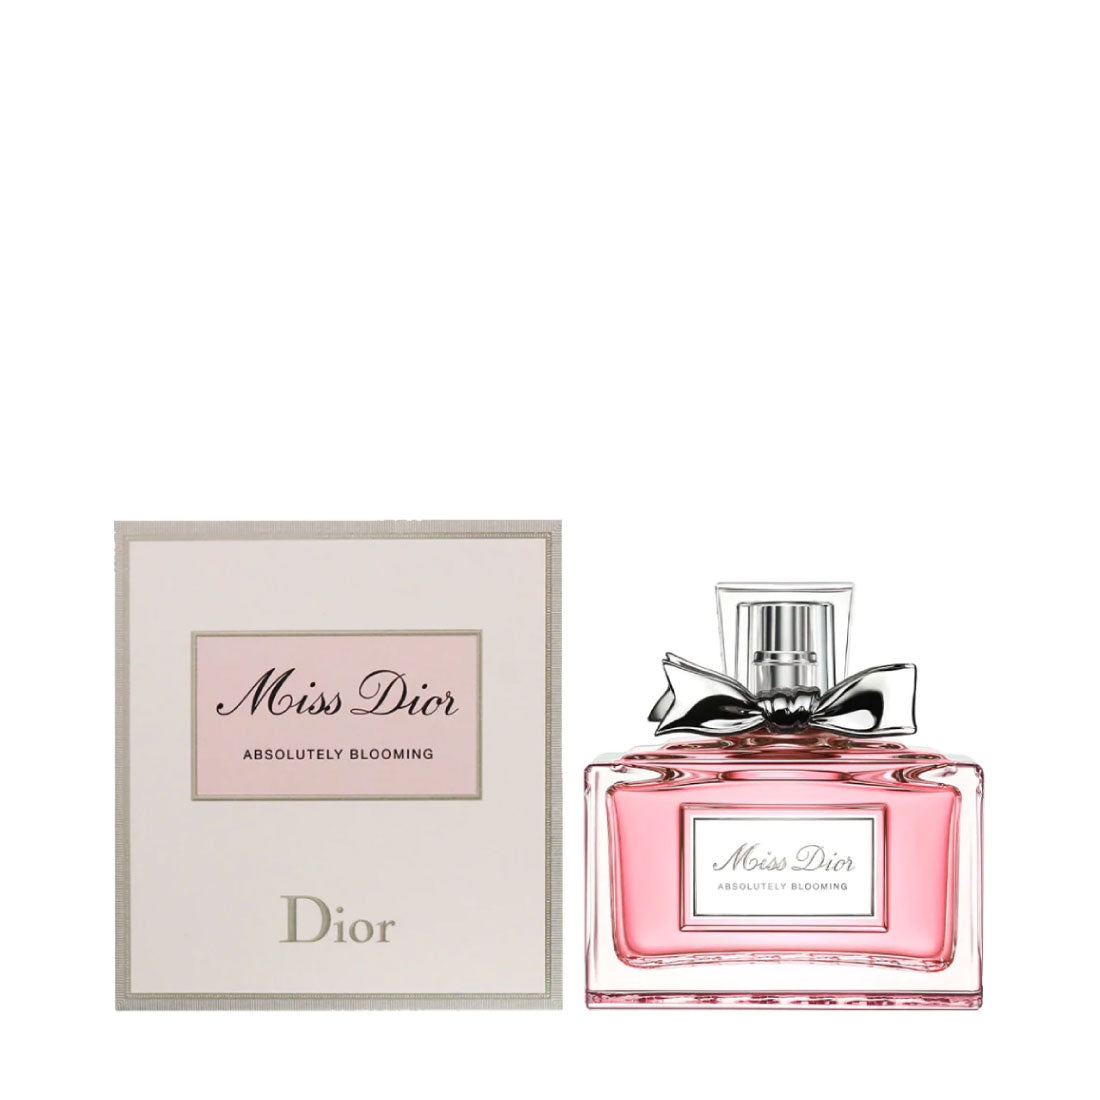 miss dior absolutely blooming